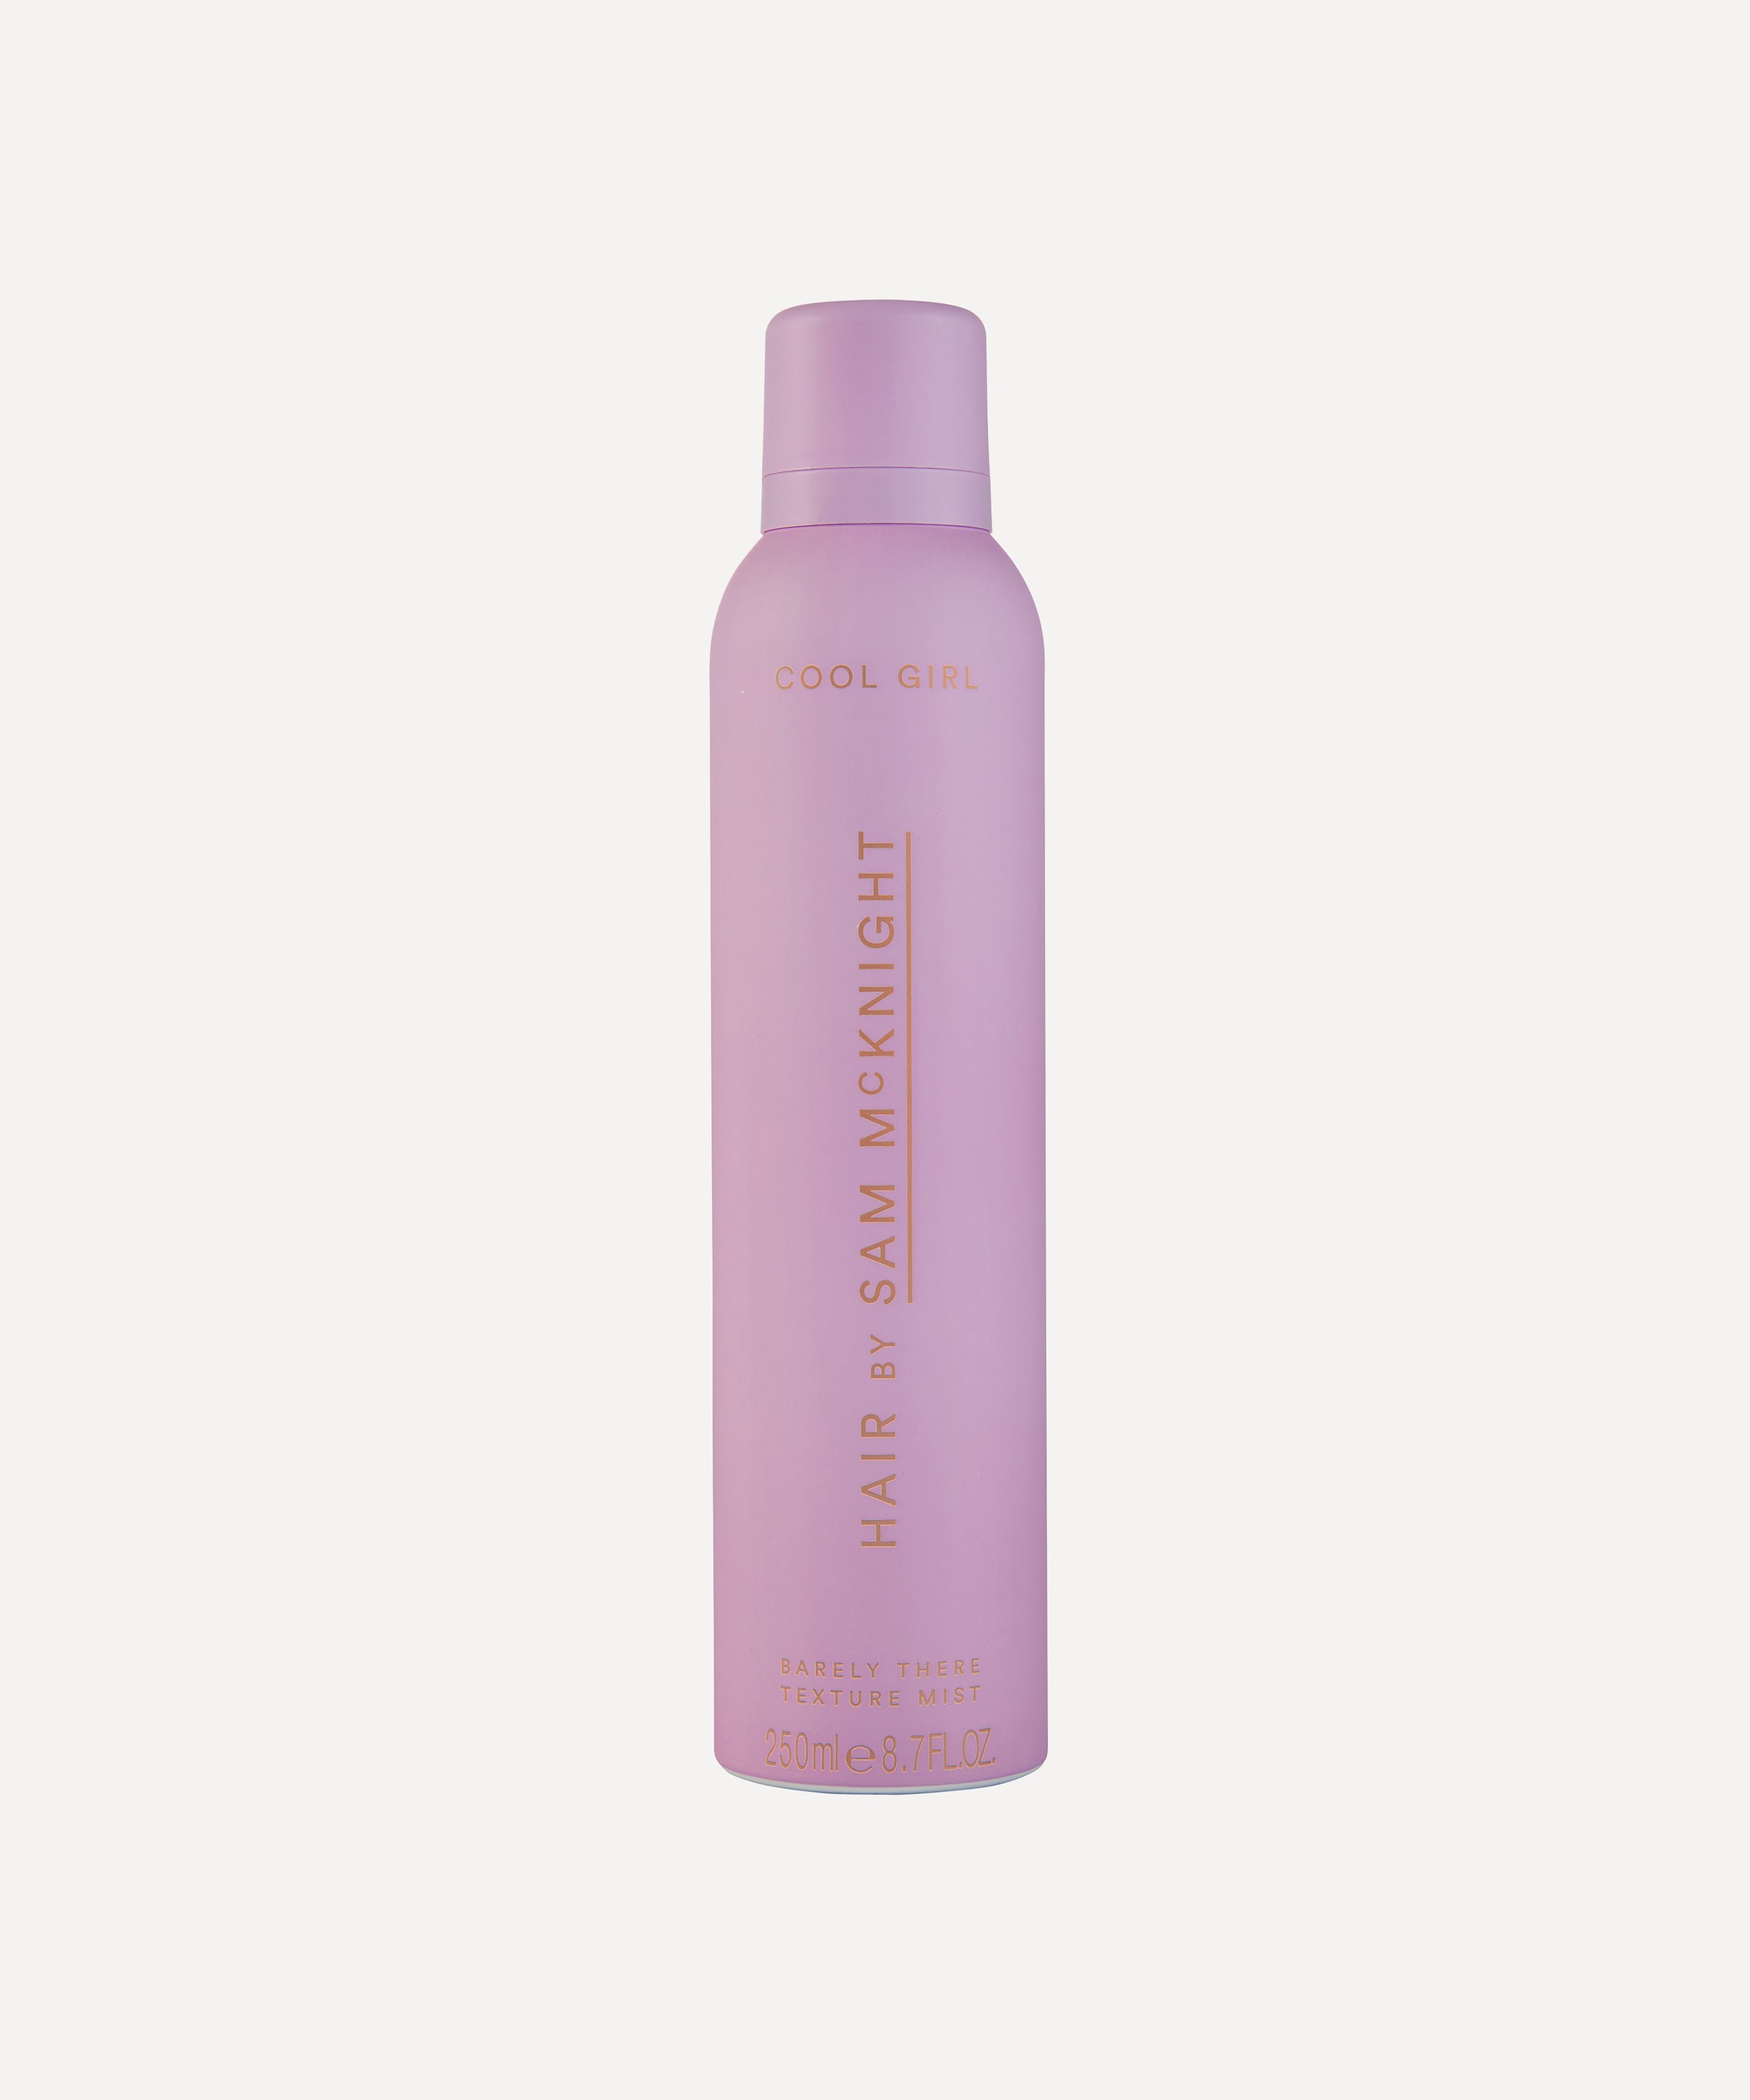 Hair by Sam McKnight Cool Girl Barely There Texture Mist 250ml | Liberty